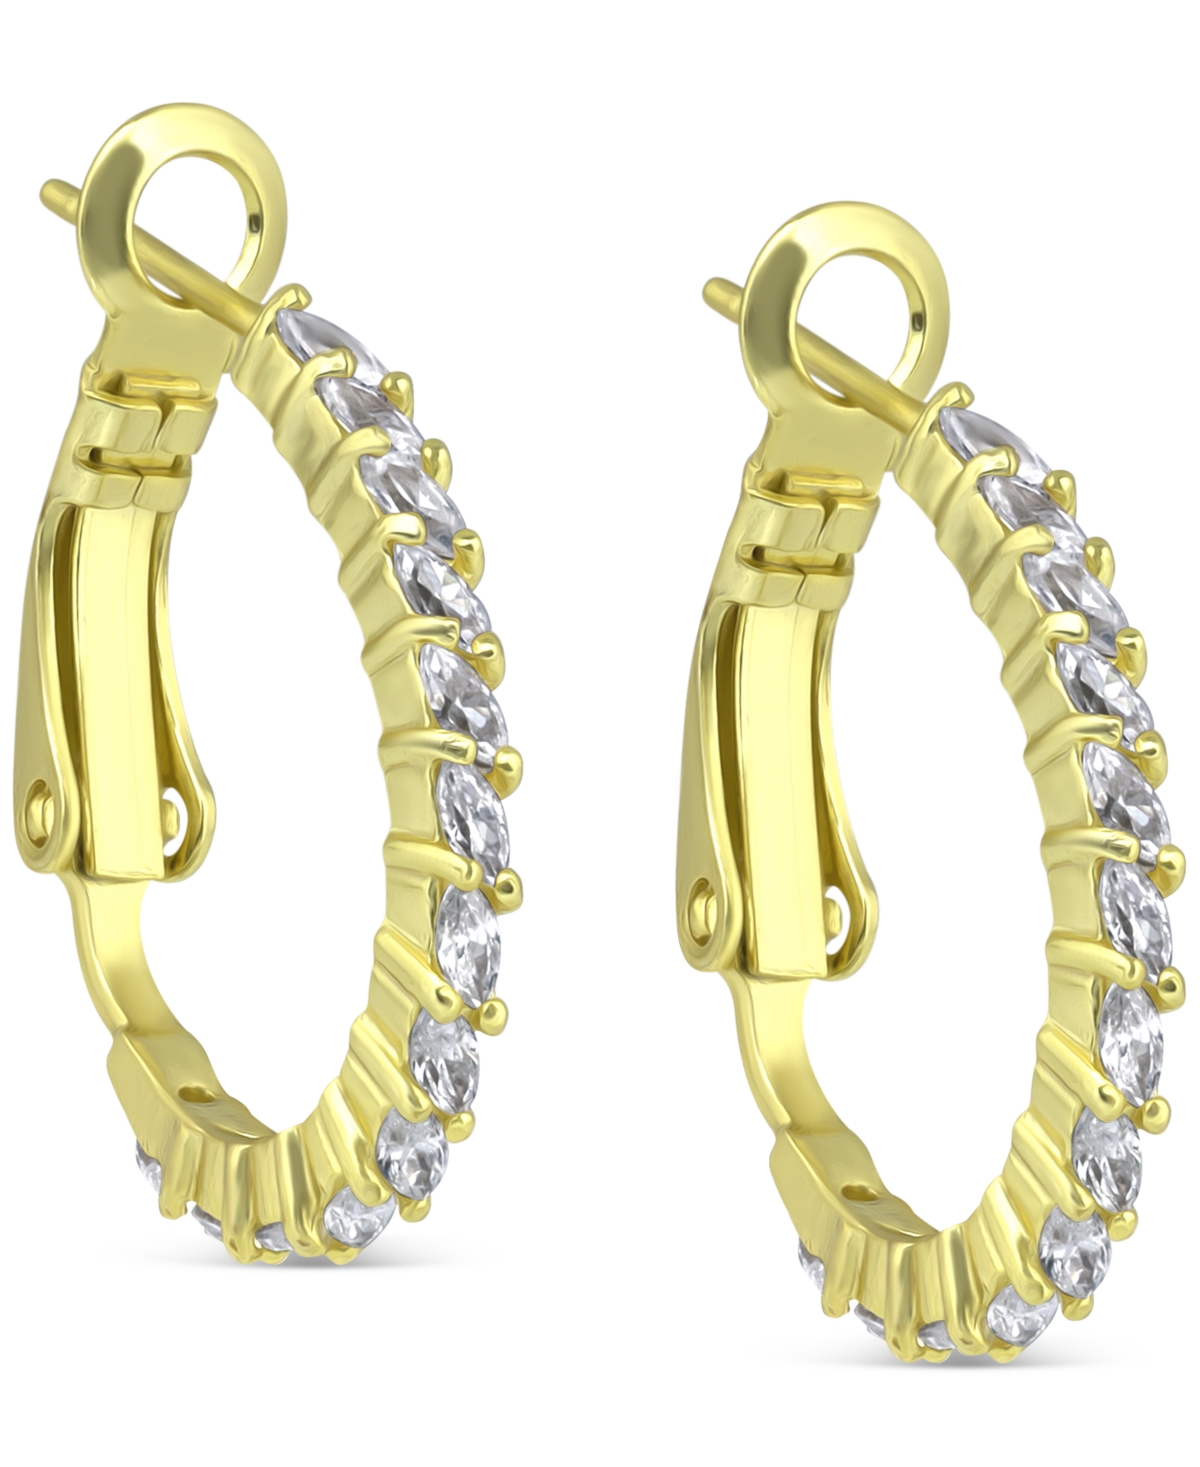 Giani Bernini Cubic Zirconia Small Hoop Earrings In 18k Gold-plated Sterling Silver, 0.75", Created For Macy's